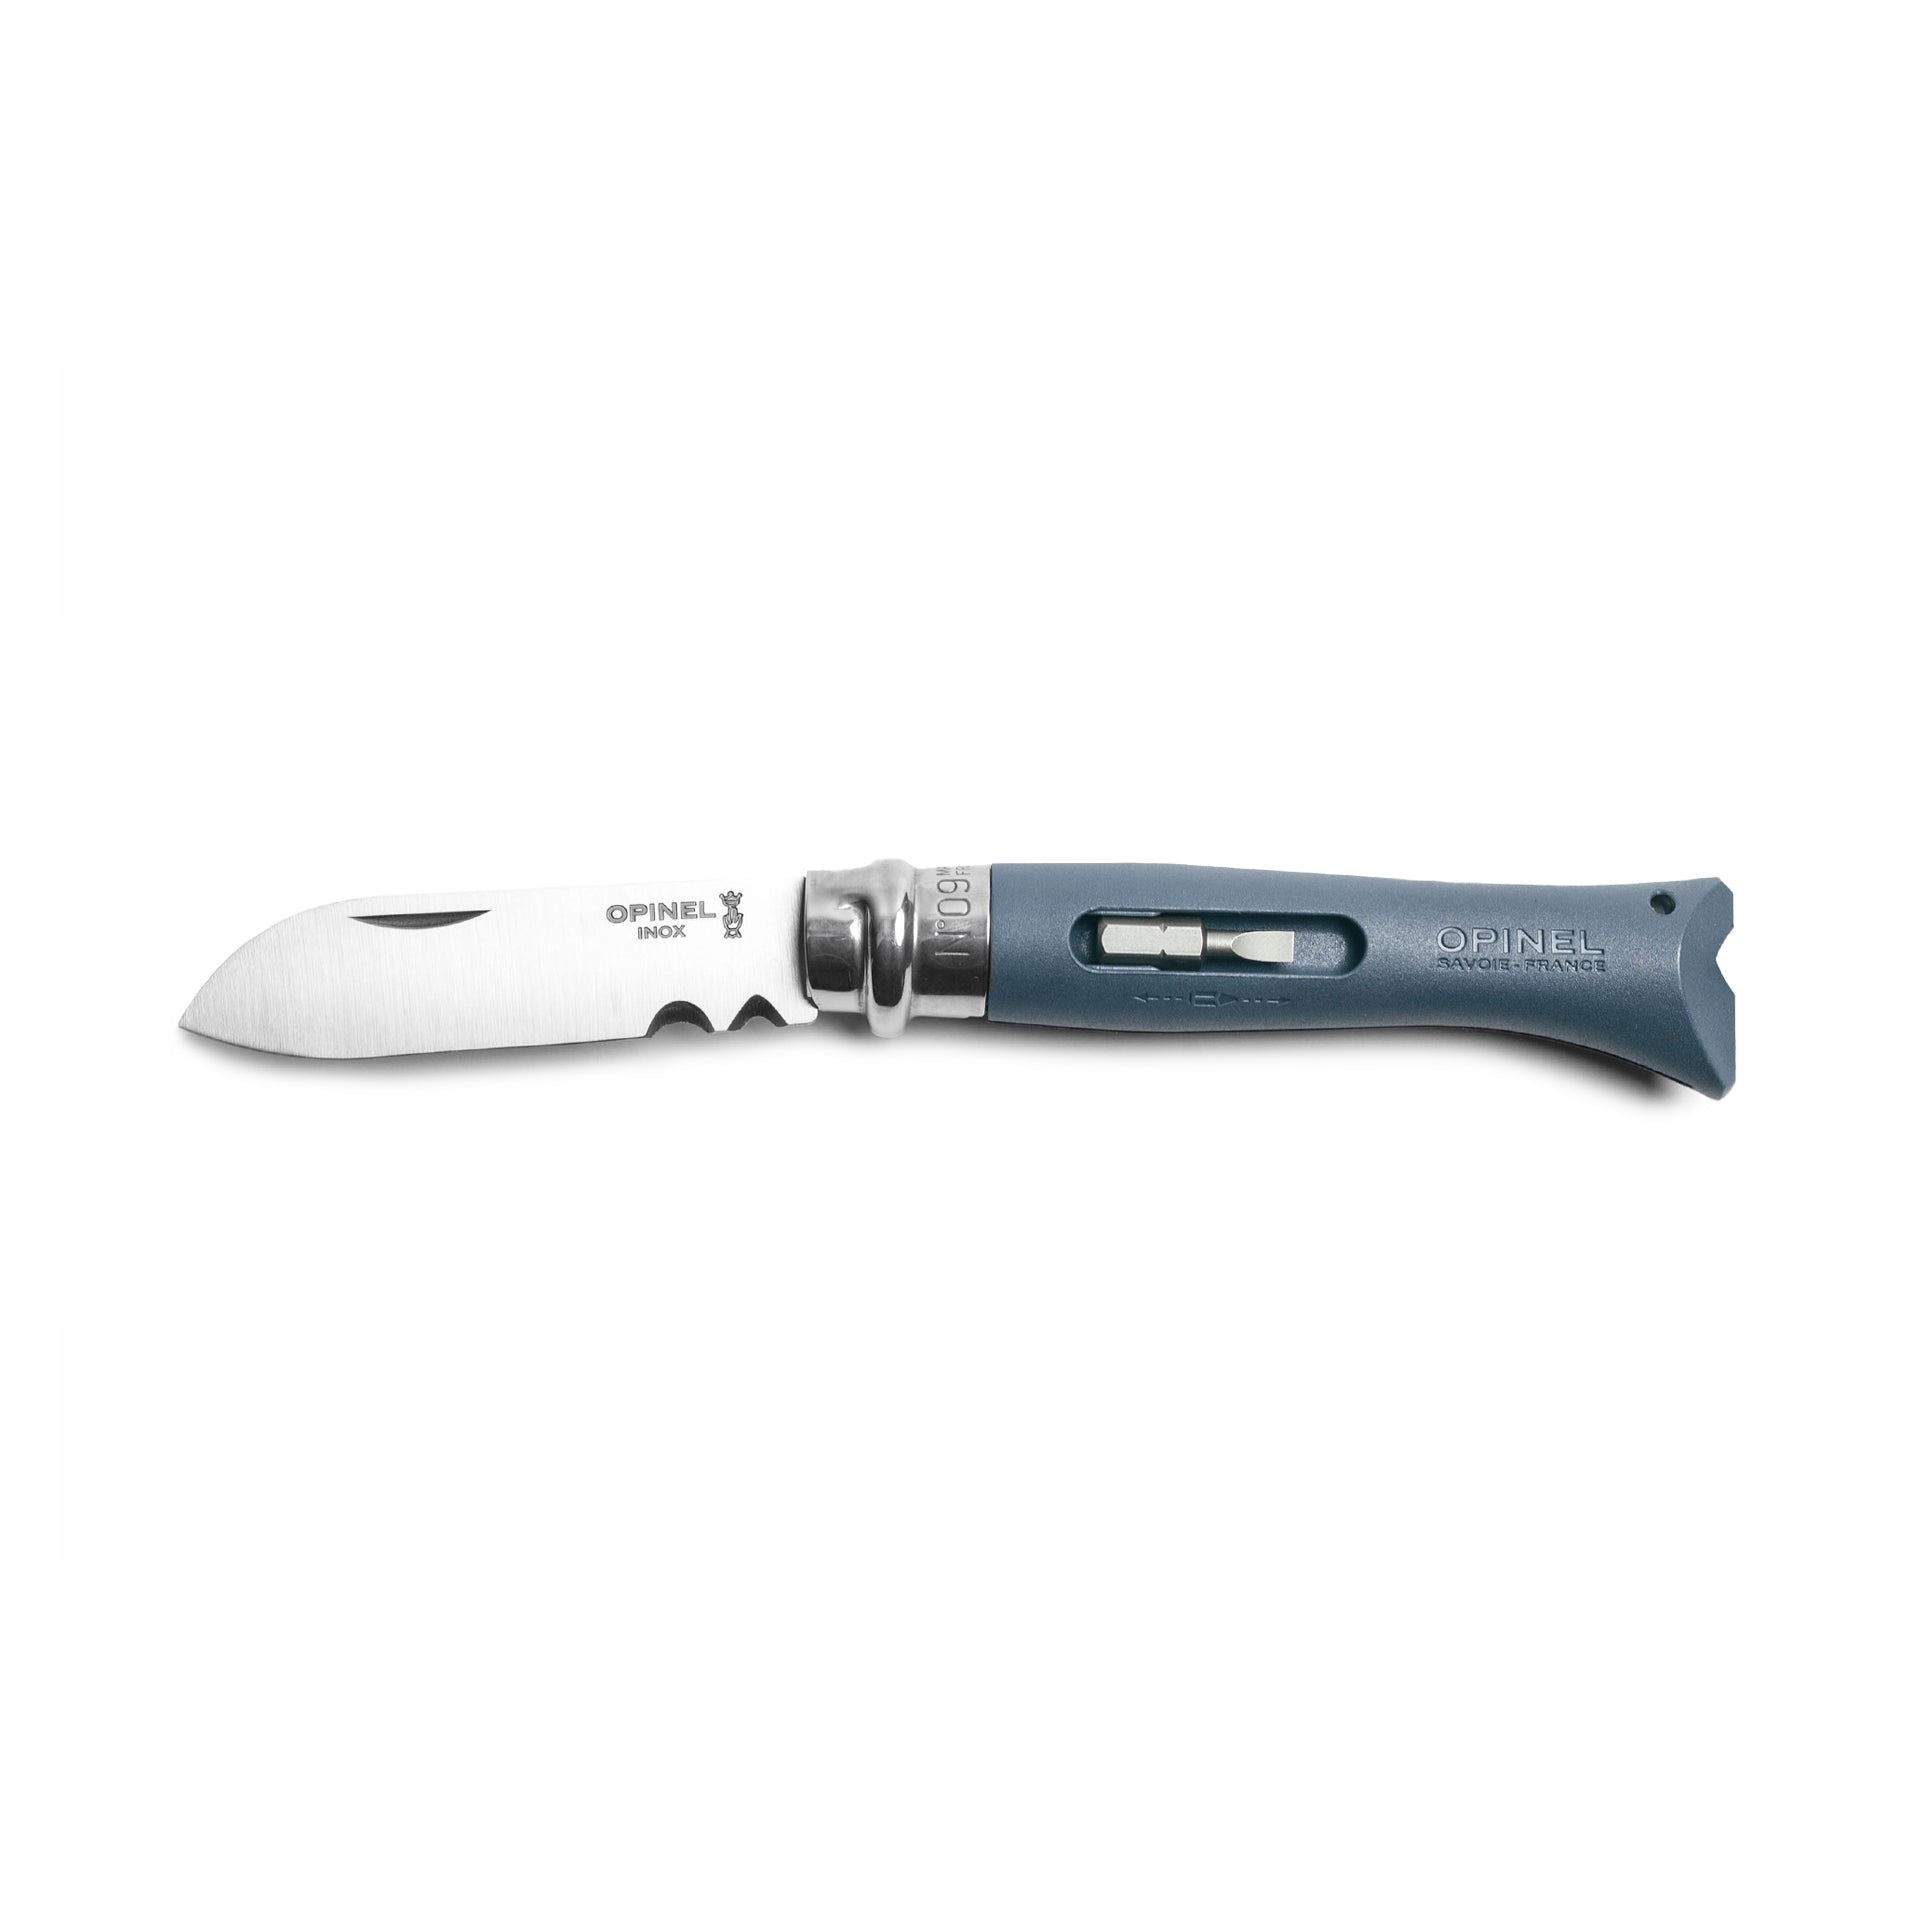 OPINEL Knife, size 7 / stainless only 11,95 €